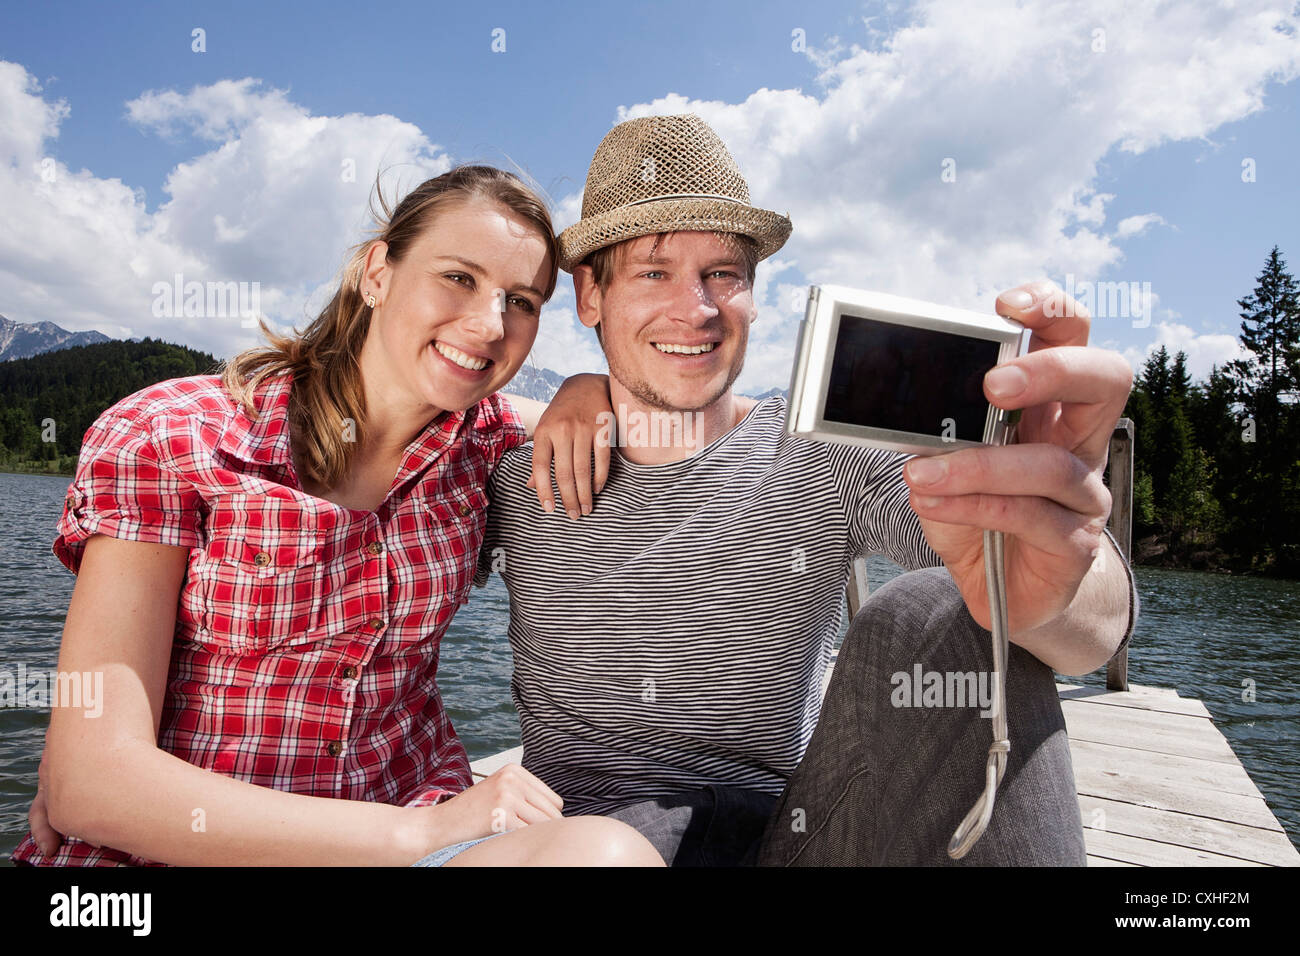 Germany, Bavaria, Couple taking self photo, smiling Banque D'Images